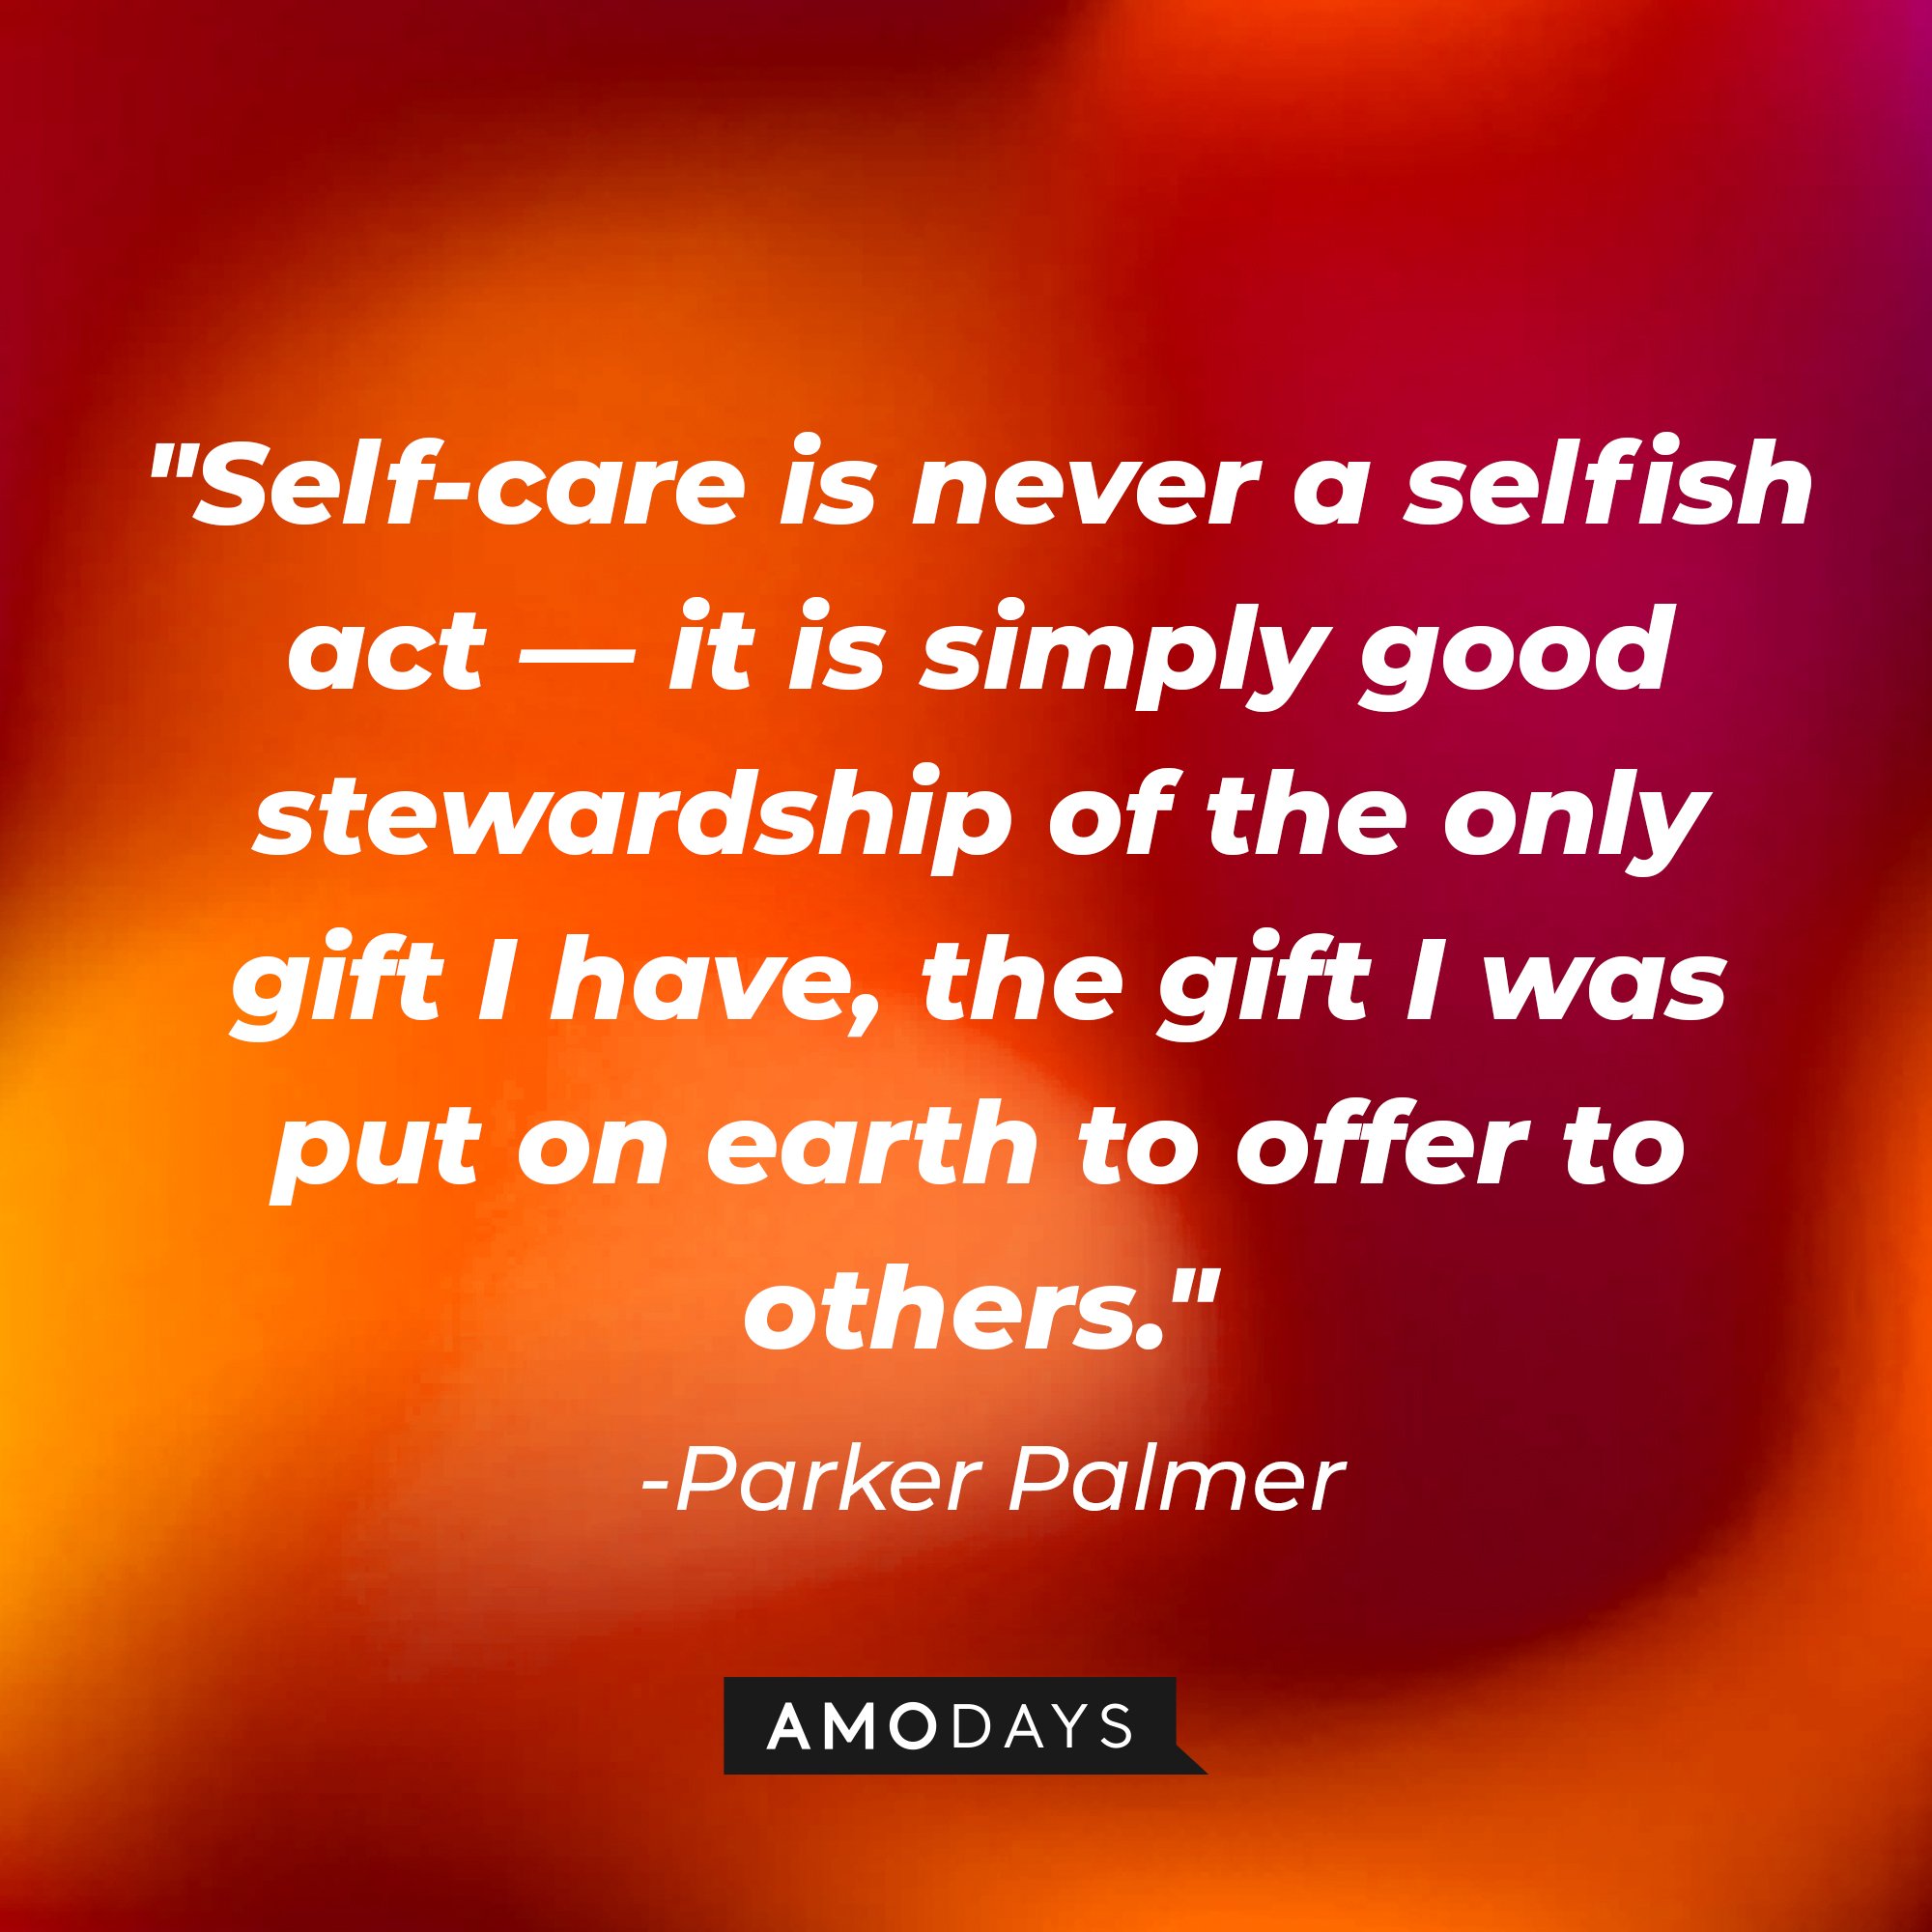 Parker Palmer's quote: "Self-care is never a selfish act—it is simply good stewardship of the only gift I have, the gift I was put on earth to offer to others." | Image: AmoDays